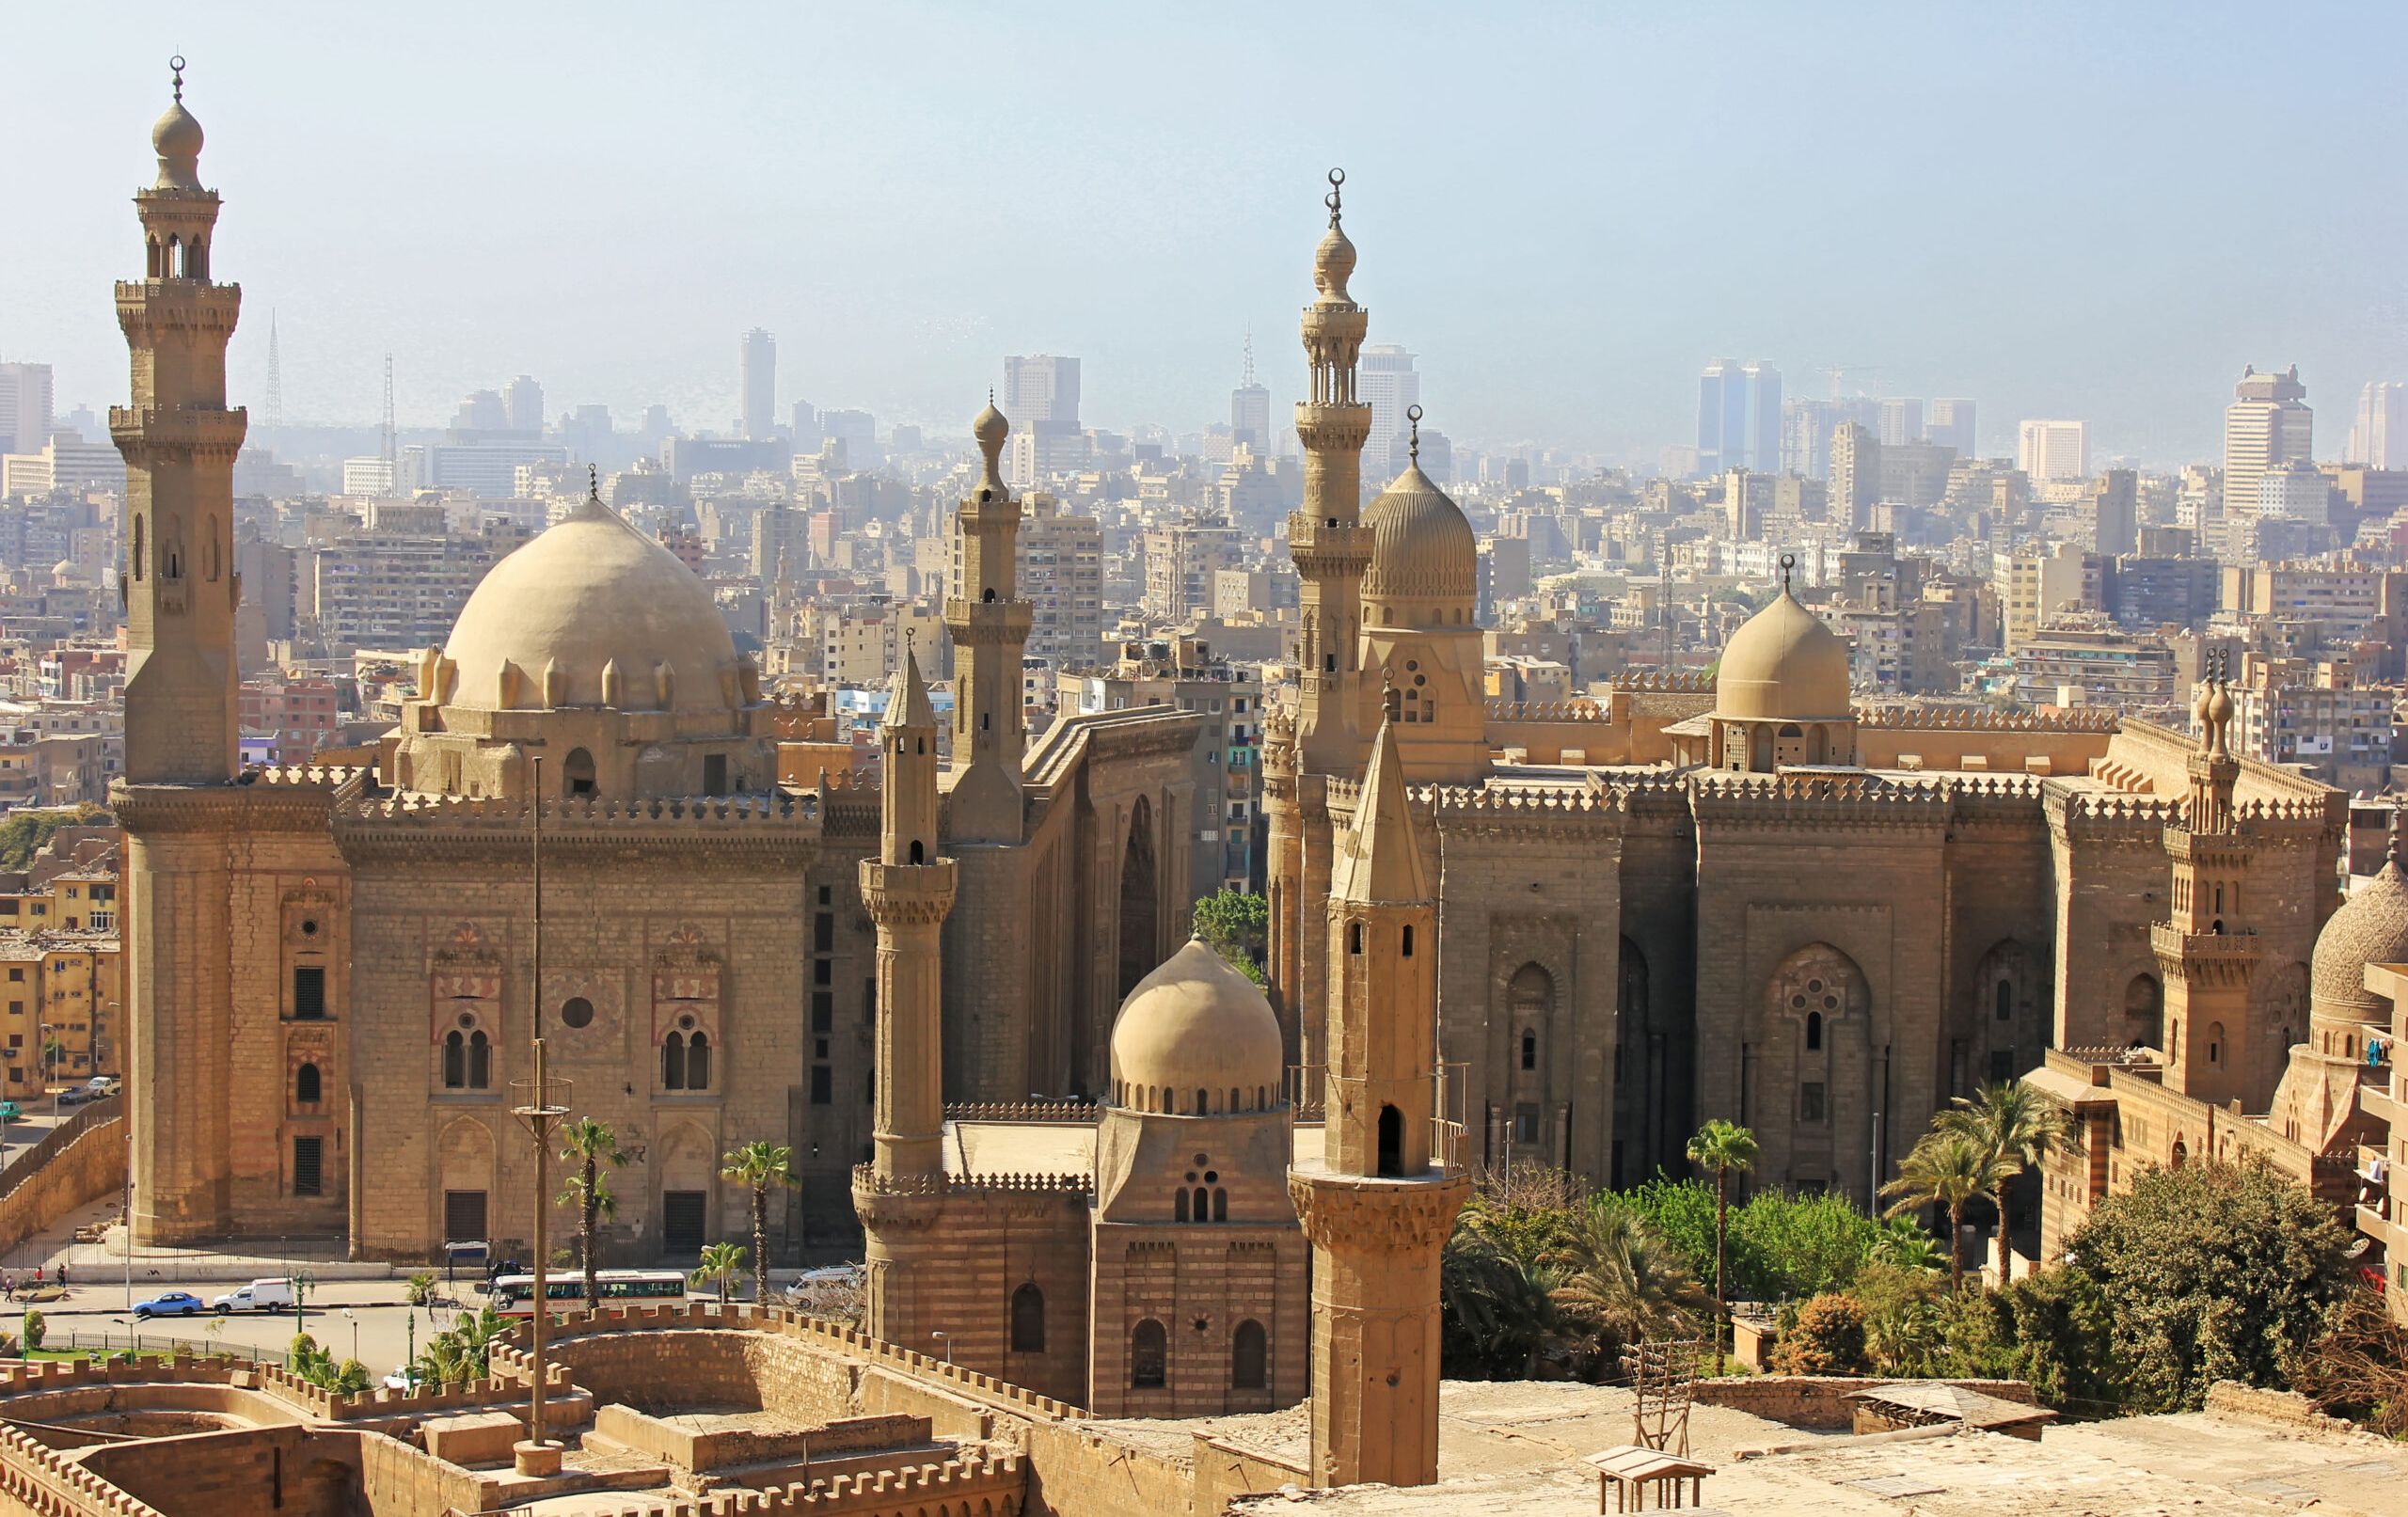 The beginnings of Cairo, the city victorious